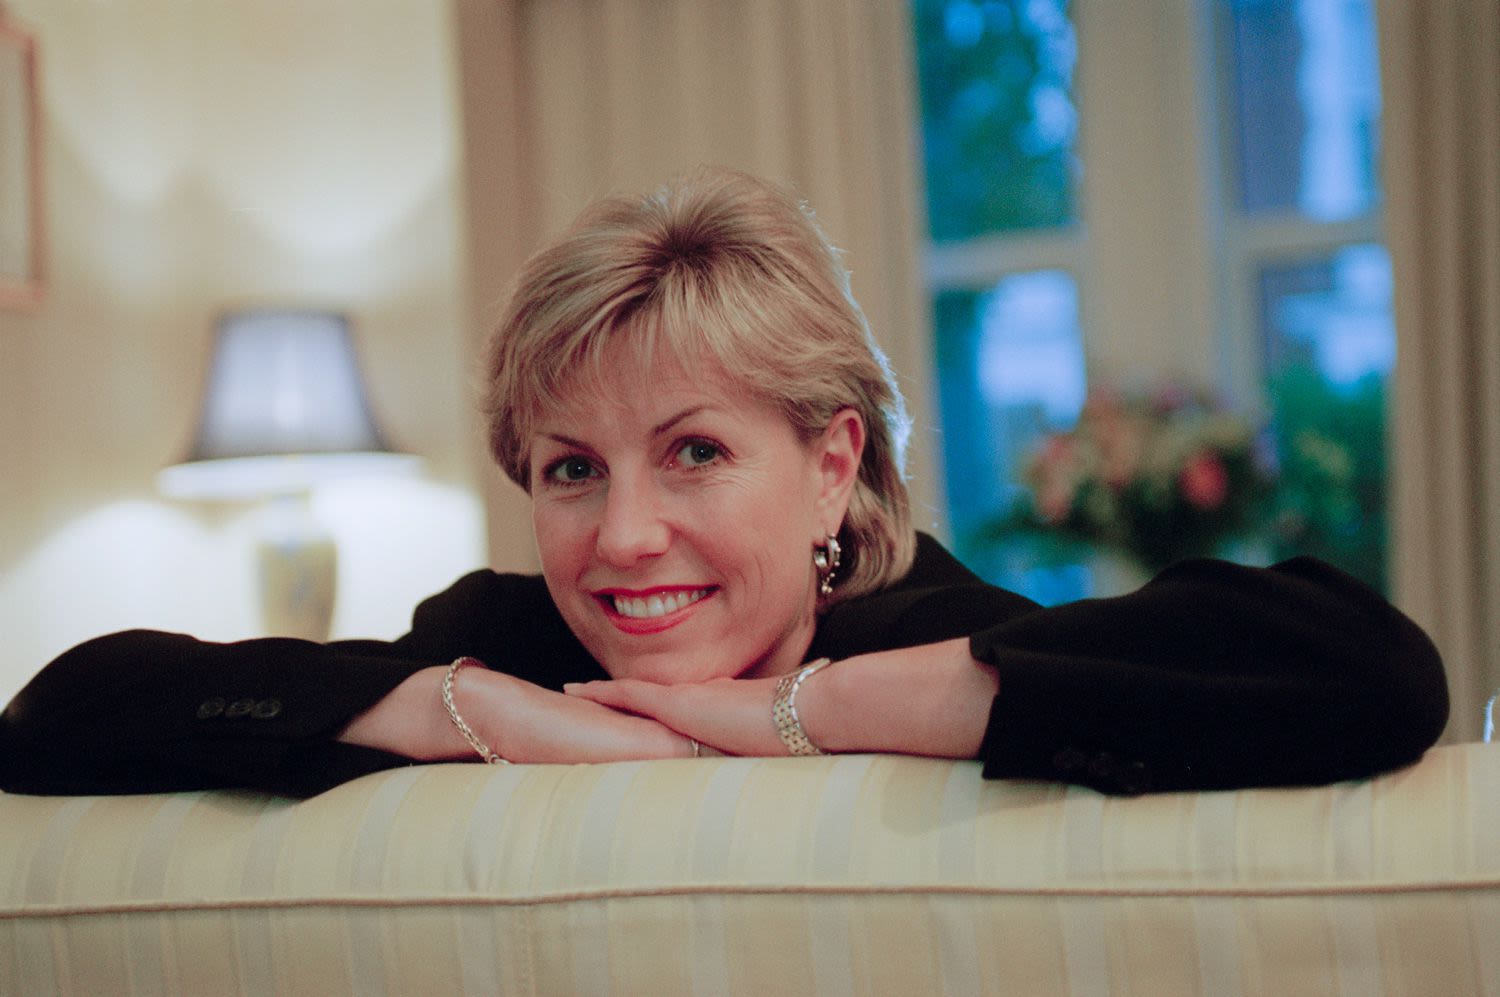 Who Killed Jill Dando? Mystery Lingers 25 Years After British Broadcaster's Murder